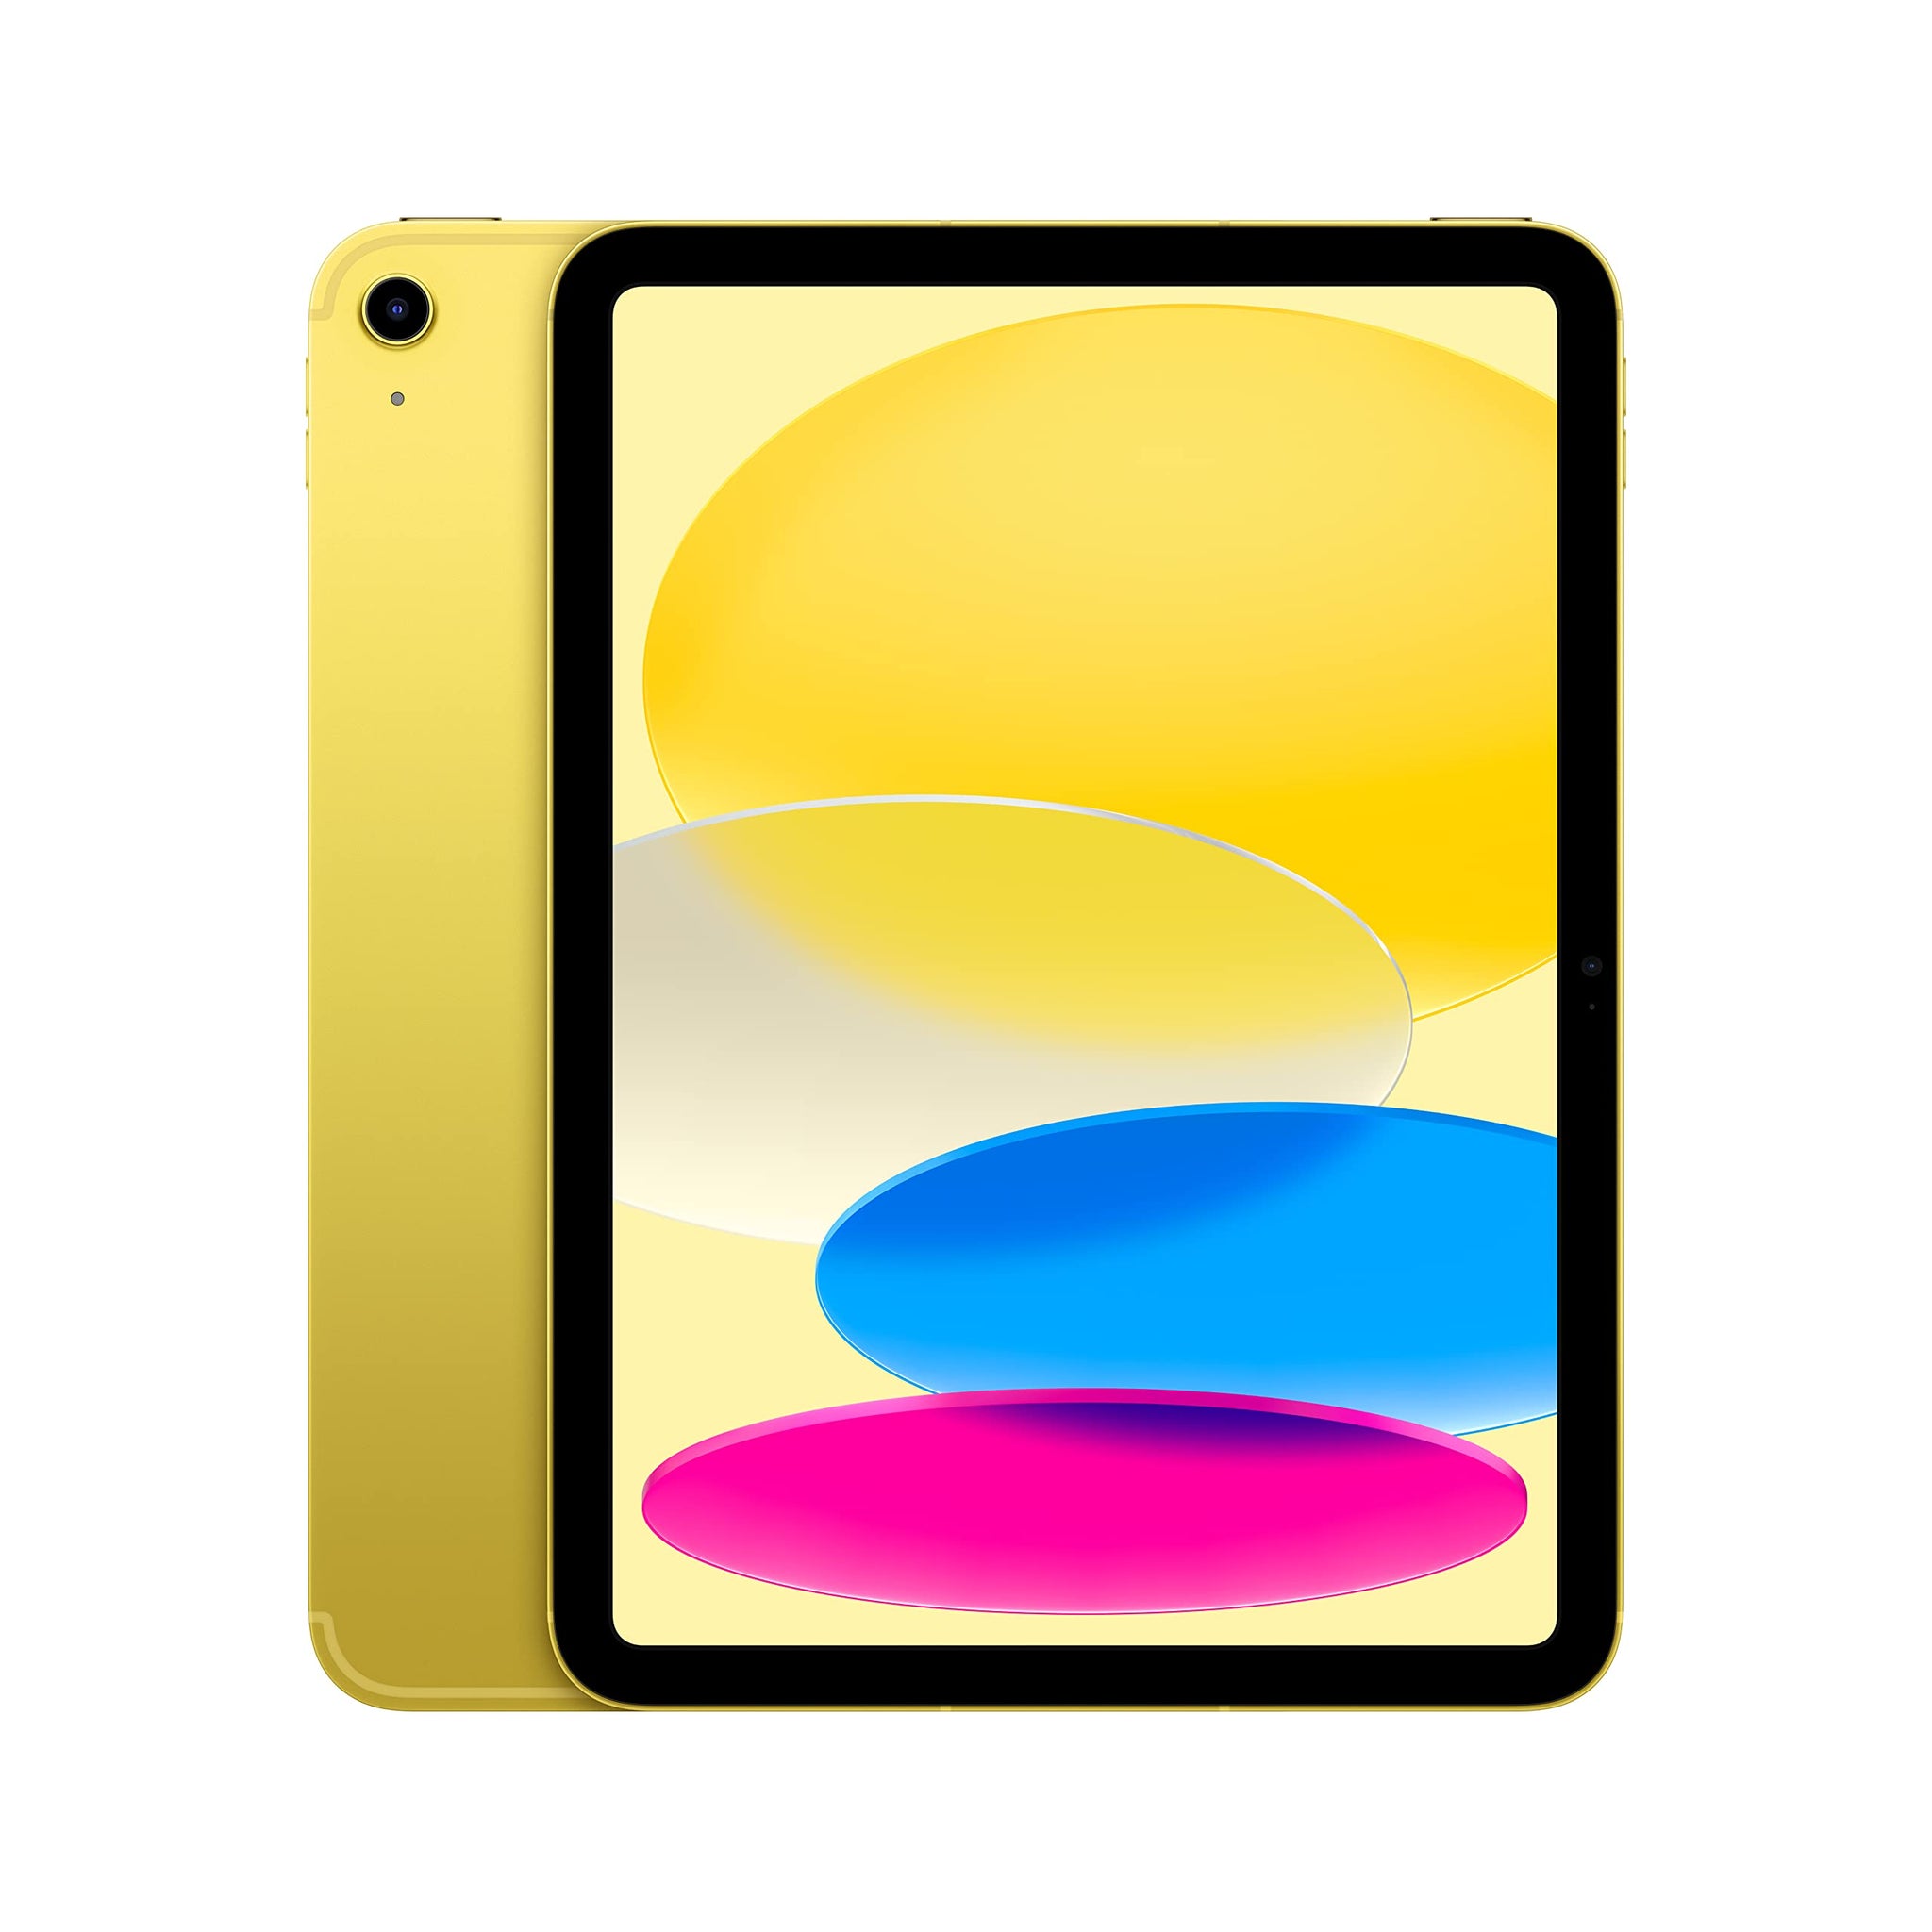 Apple iPad (10th Generation): with A14 Bionic chip, 10.9-inch Liquid Retina Display, 256GB, Wi-Fi 6, 12MP front/12MP Back Camera, Touch ID, All-Day Battery Life – Blue